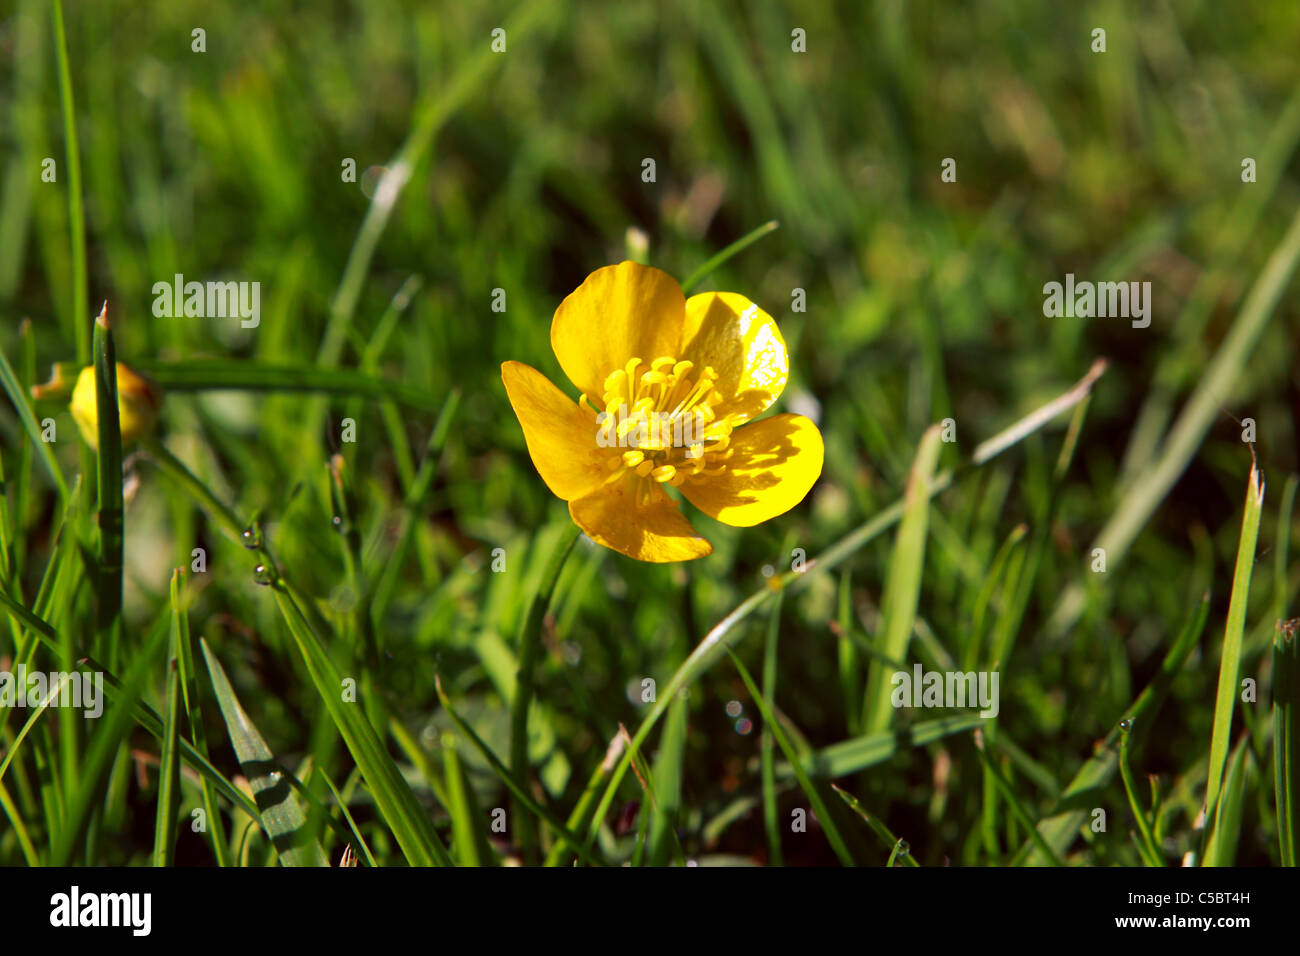 yellow flower of Potentilla sp. in the grass close up Stock Photo